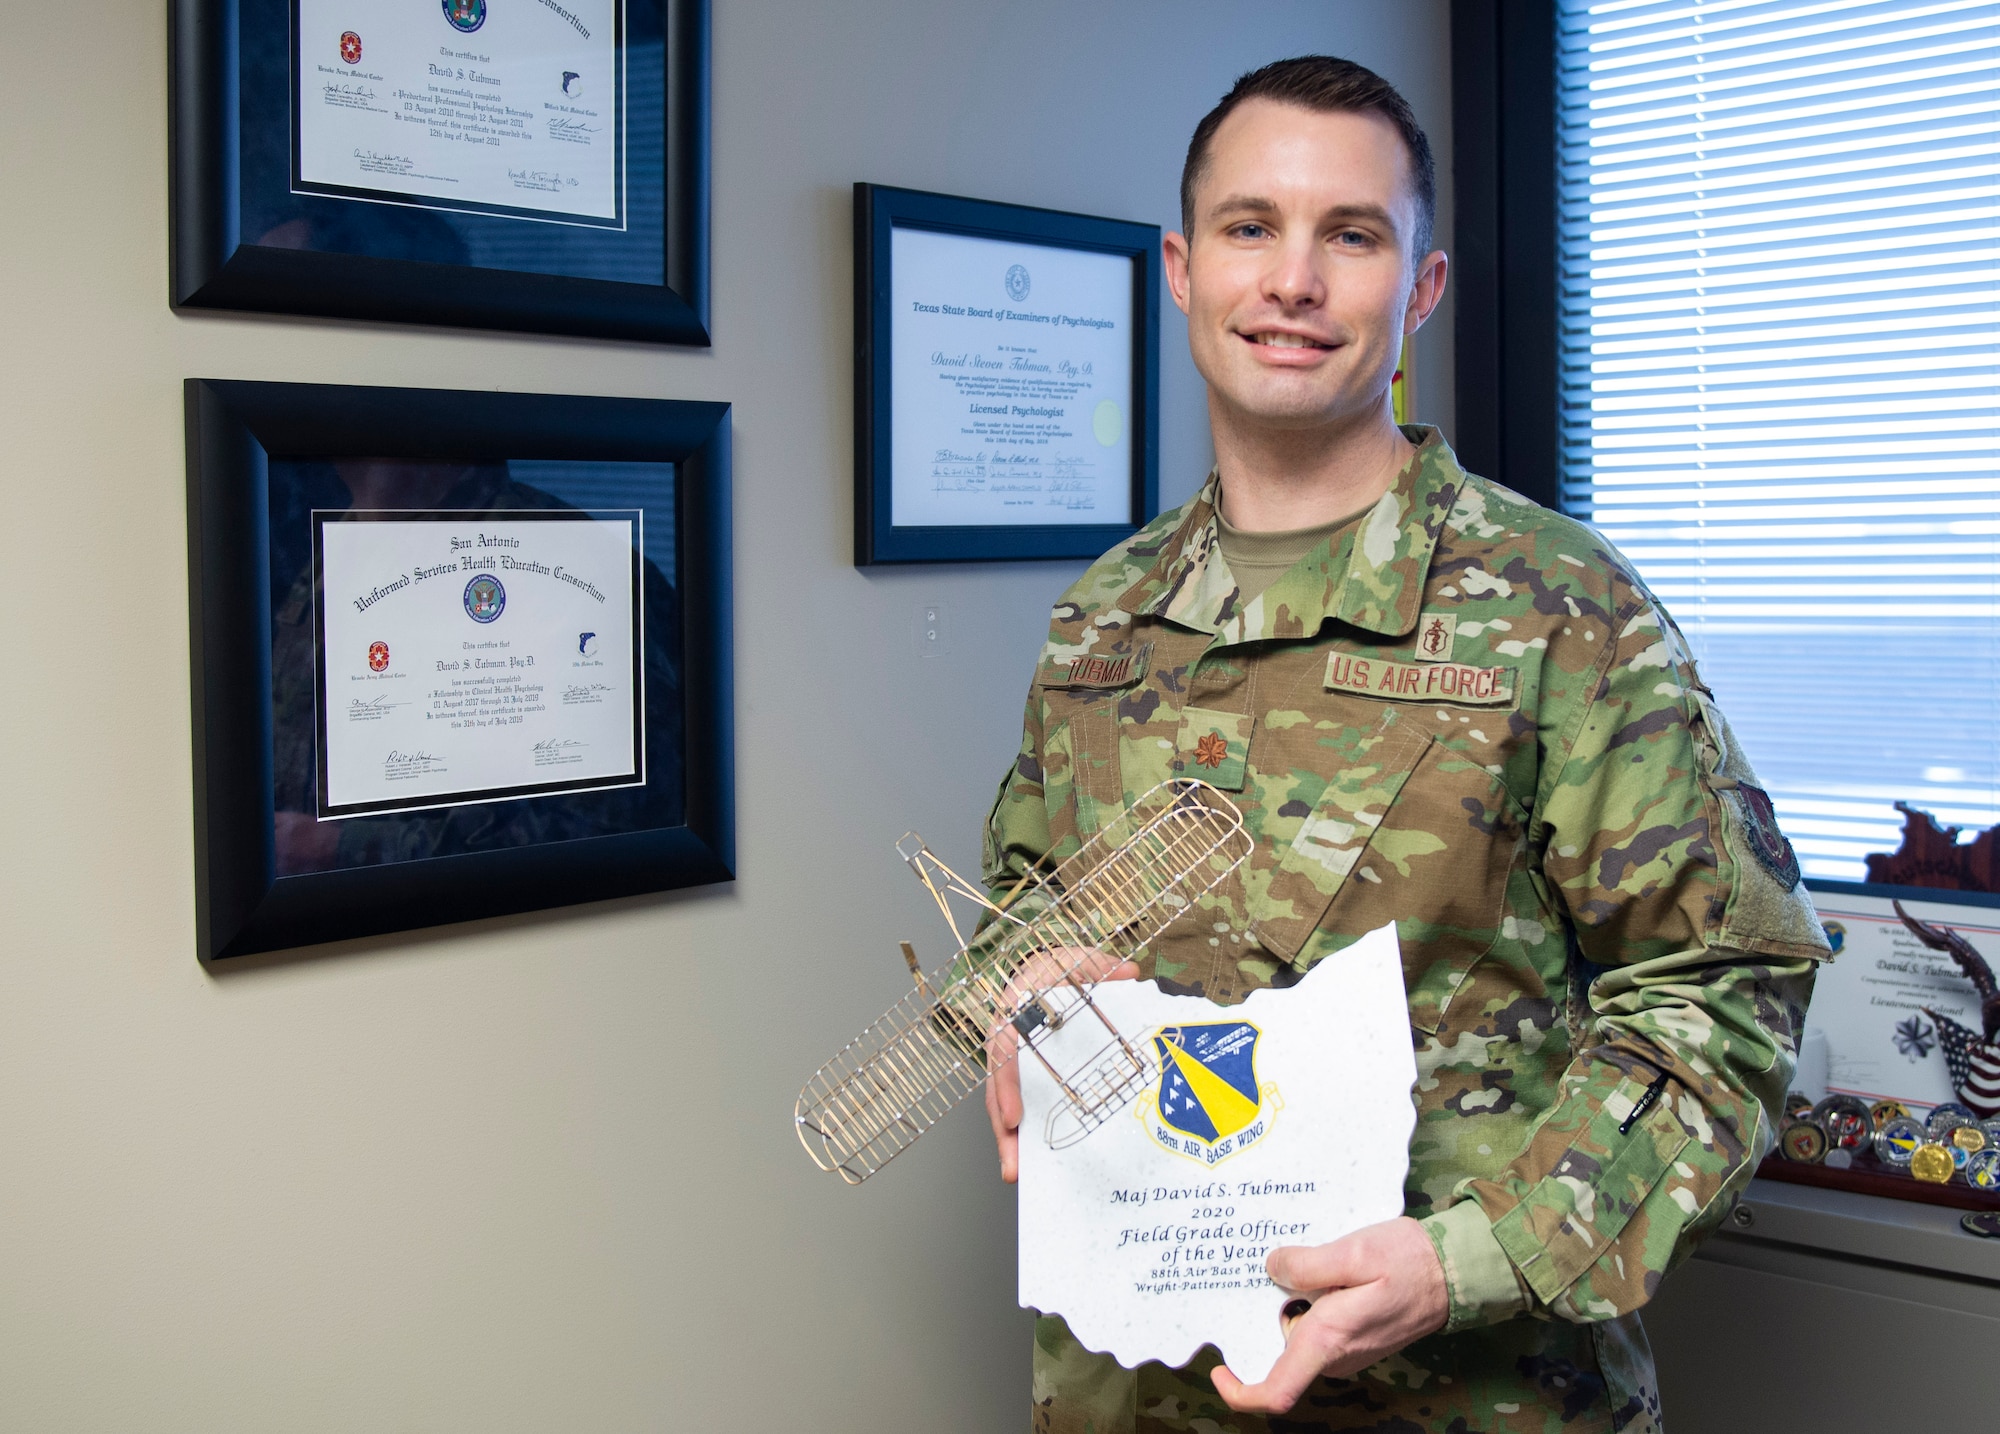 Maj. David Tubman stands in his office with the 88th Air Base Wing’s 2020 Field Grade Officer of the Year Award for his work in the 88th Medical Group’s Mental Health Clinic. U.S. Air Force photo/Wesley Farnsworth